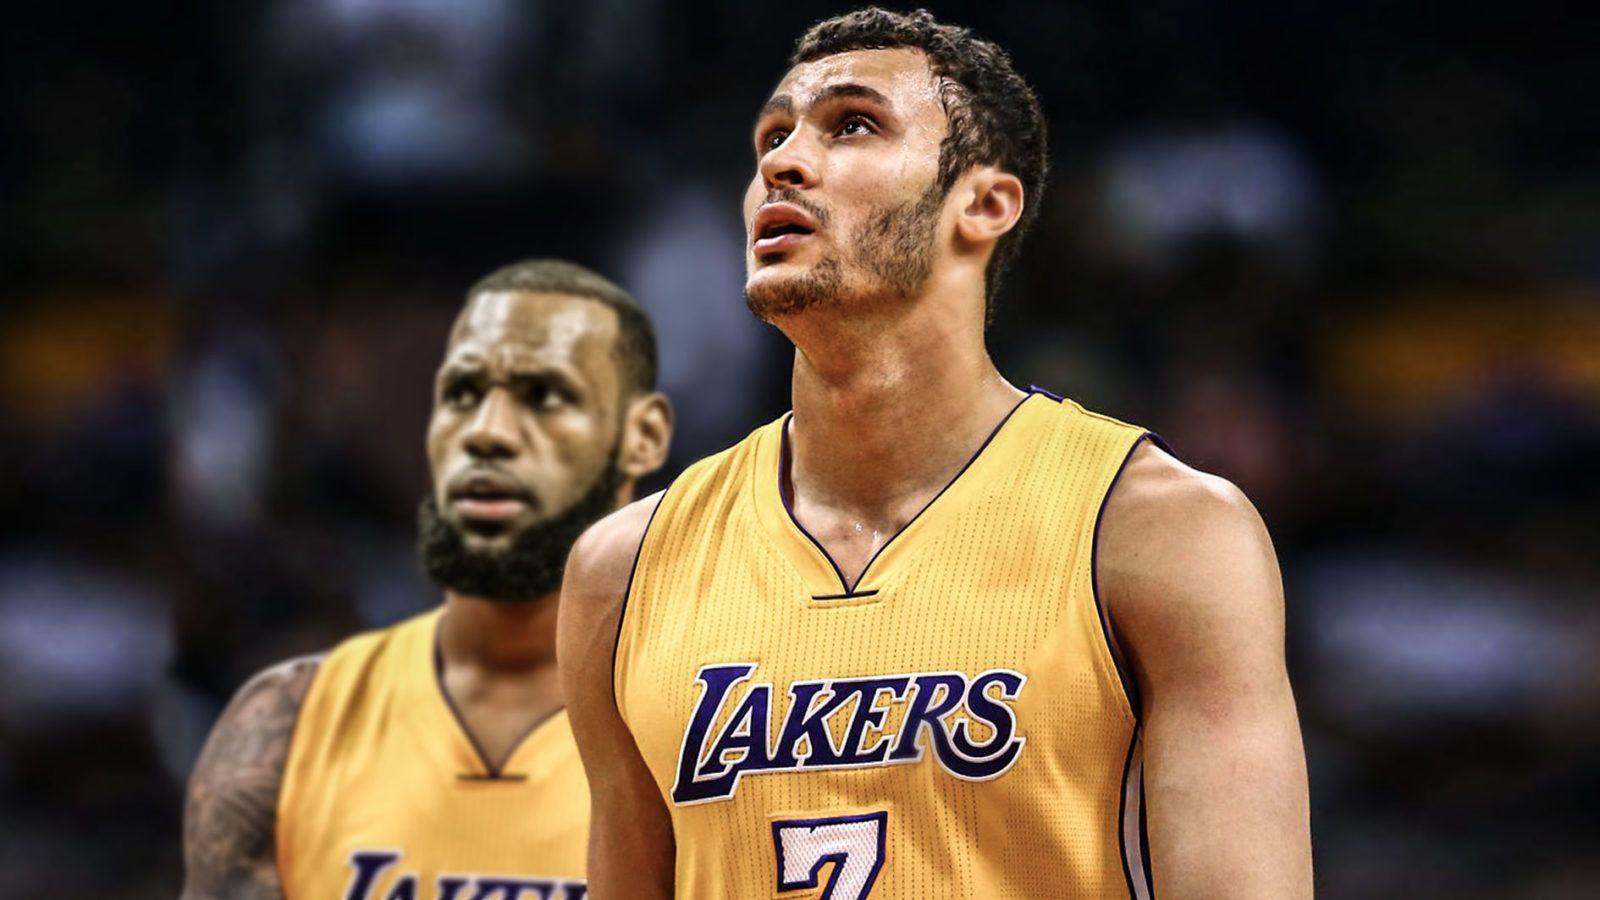 Lakers news: What Larry Nance Jr. really thinks of rumored LeBron